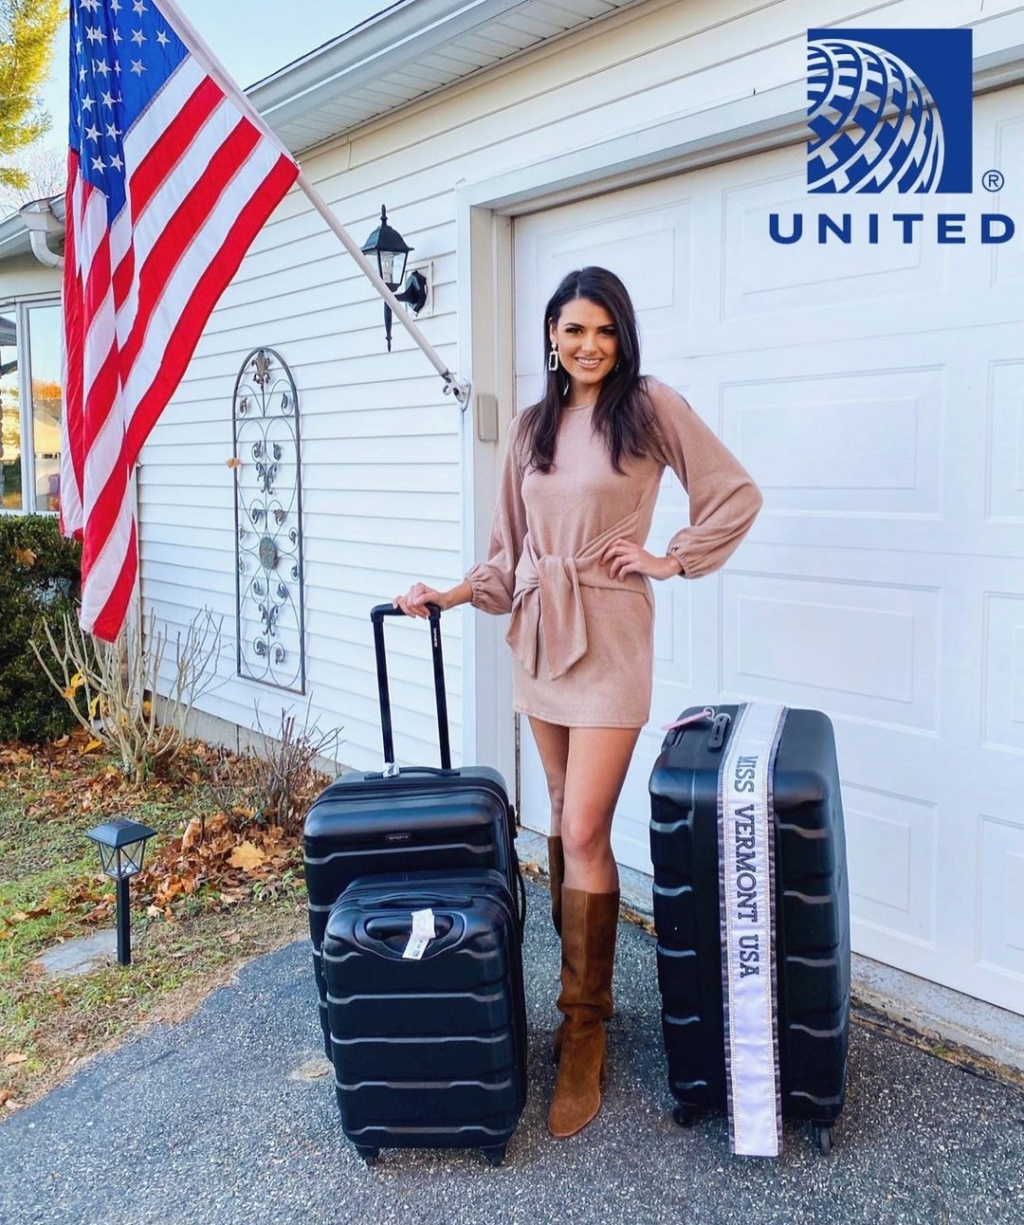 ROAD TO MISS USA 2021 is KENTUCKY! - Page 6 25821610